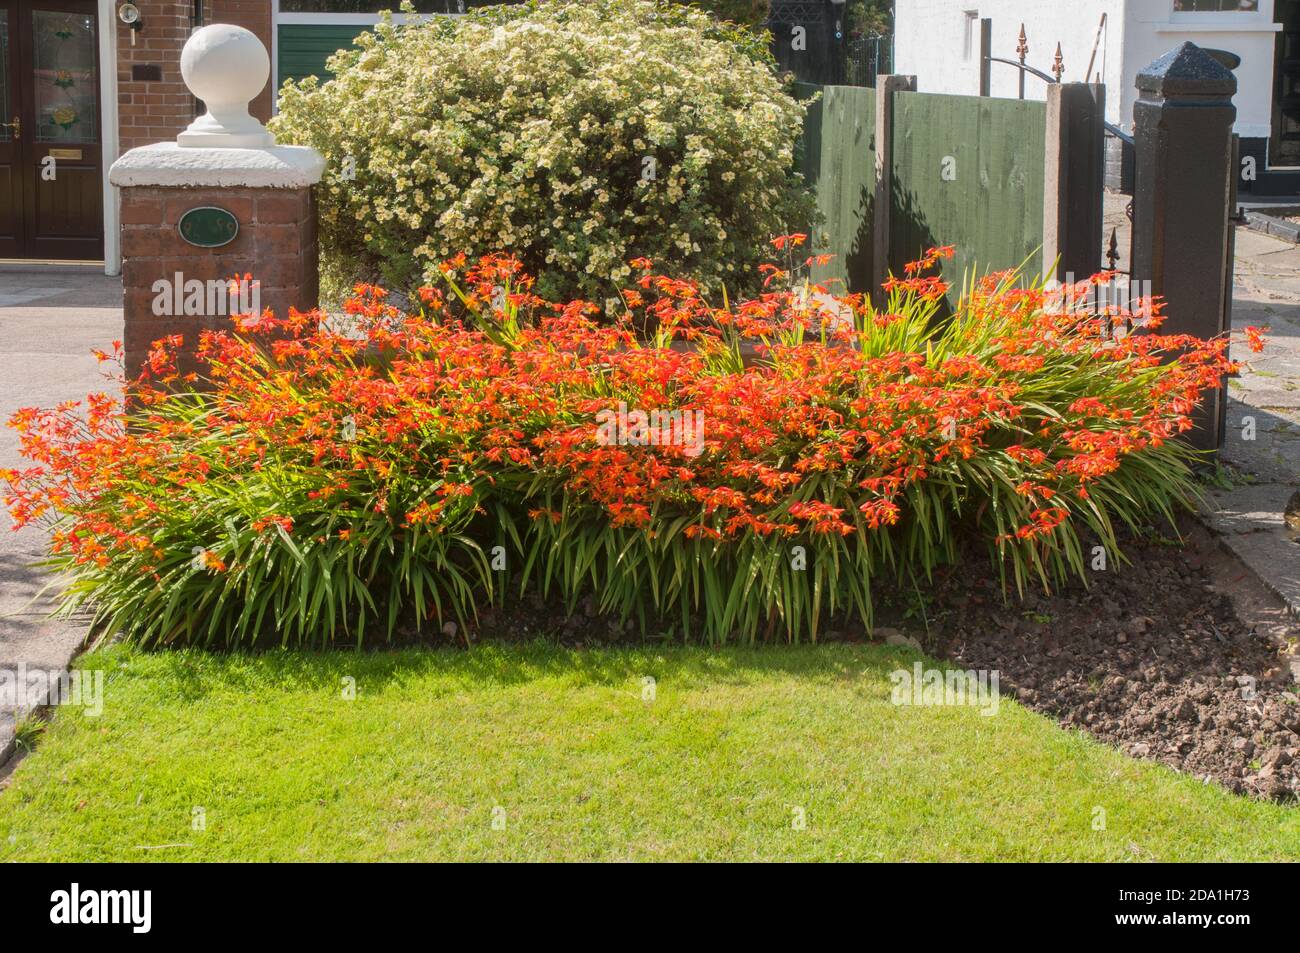 Bed of bright orange Crocosmia growing in a flower border in front of house in summer Stock Photo